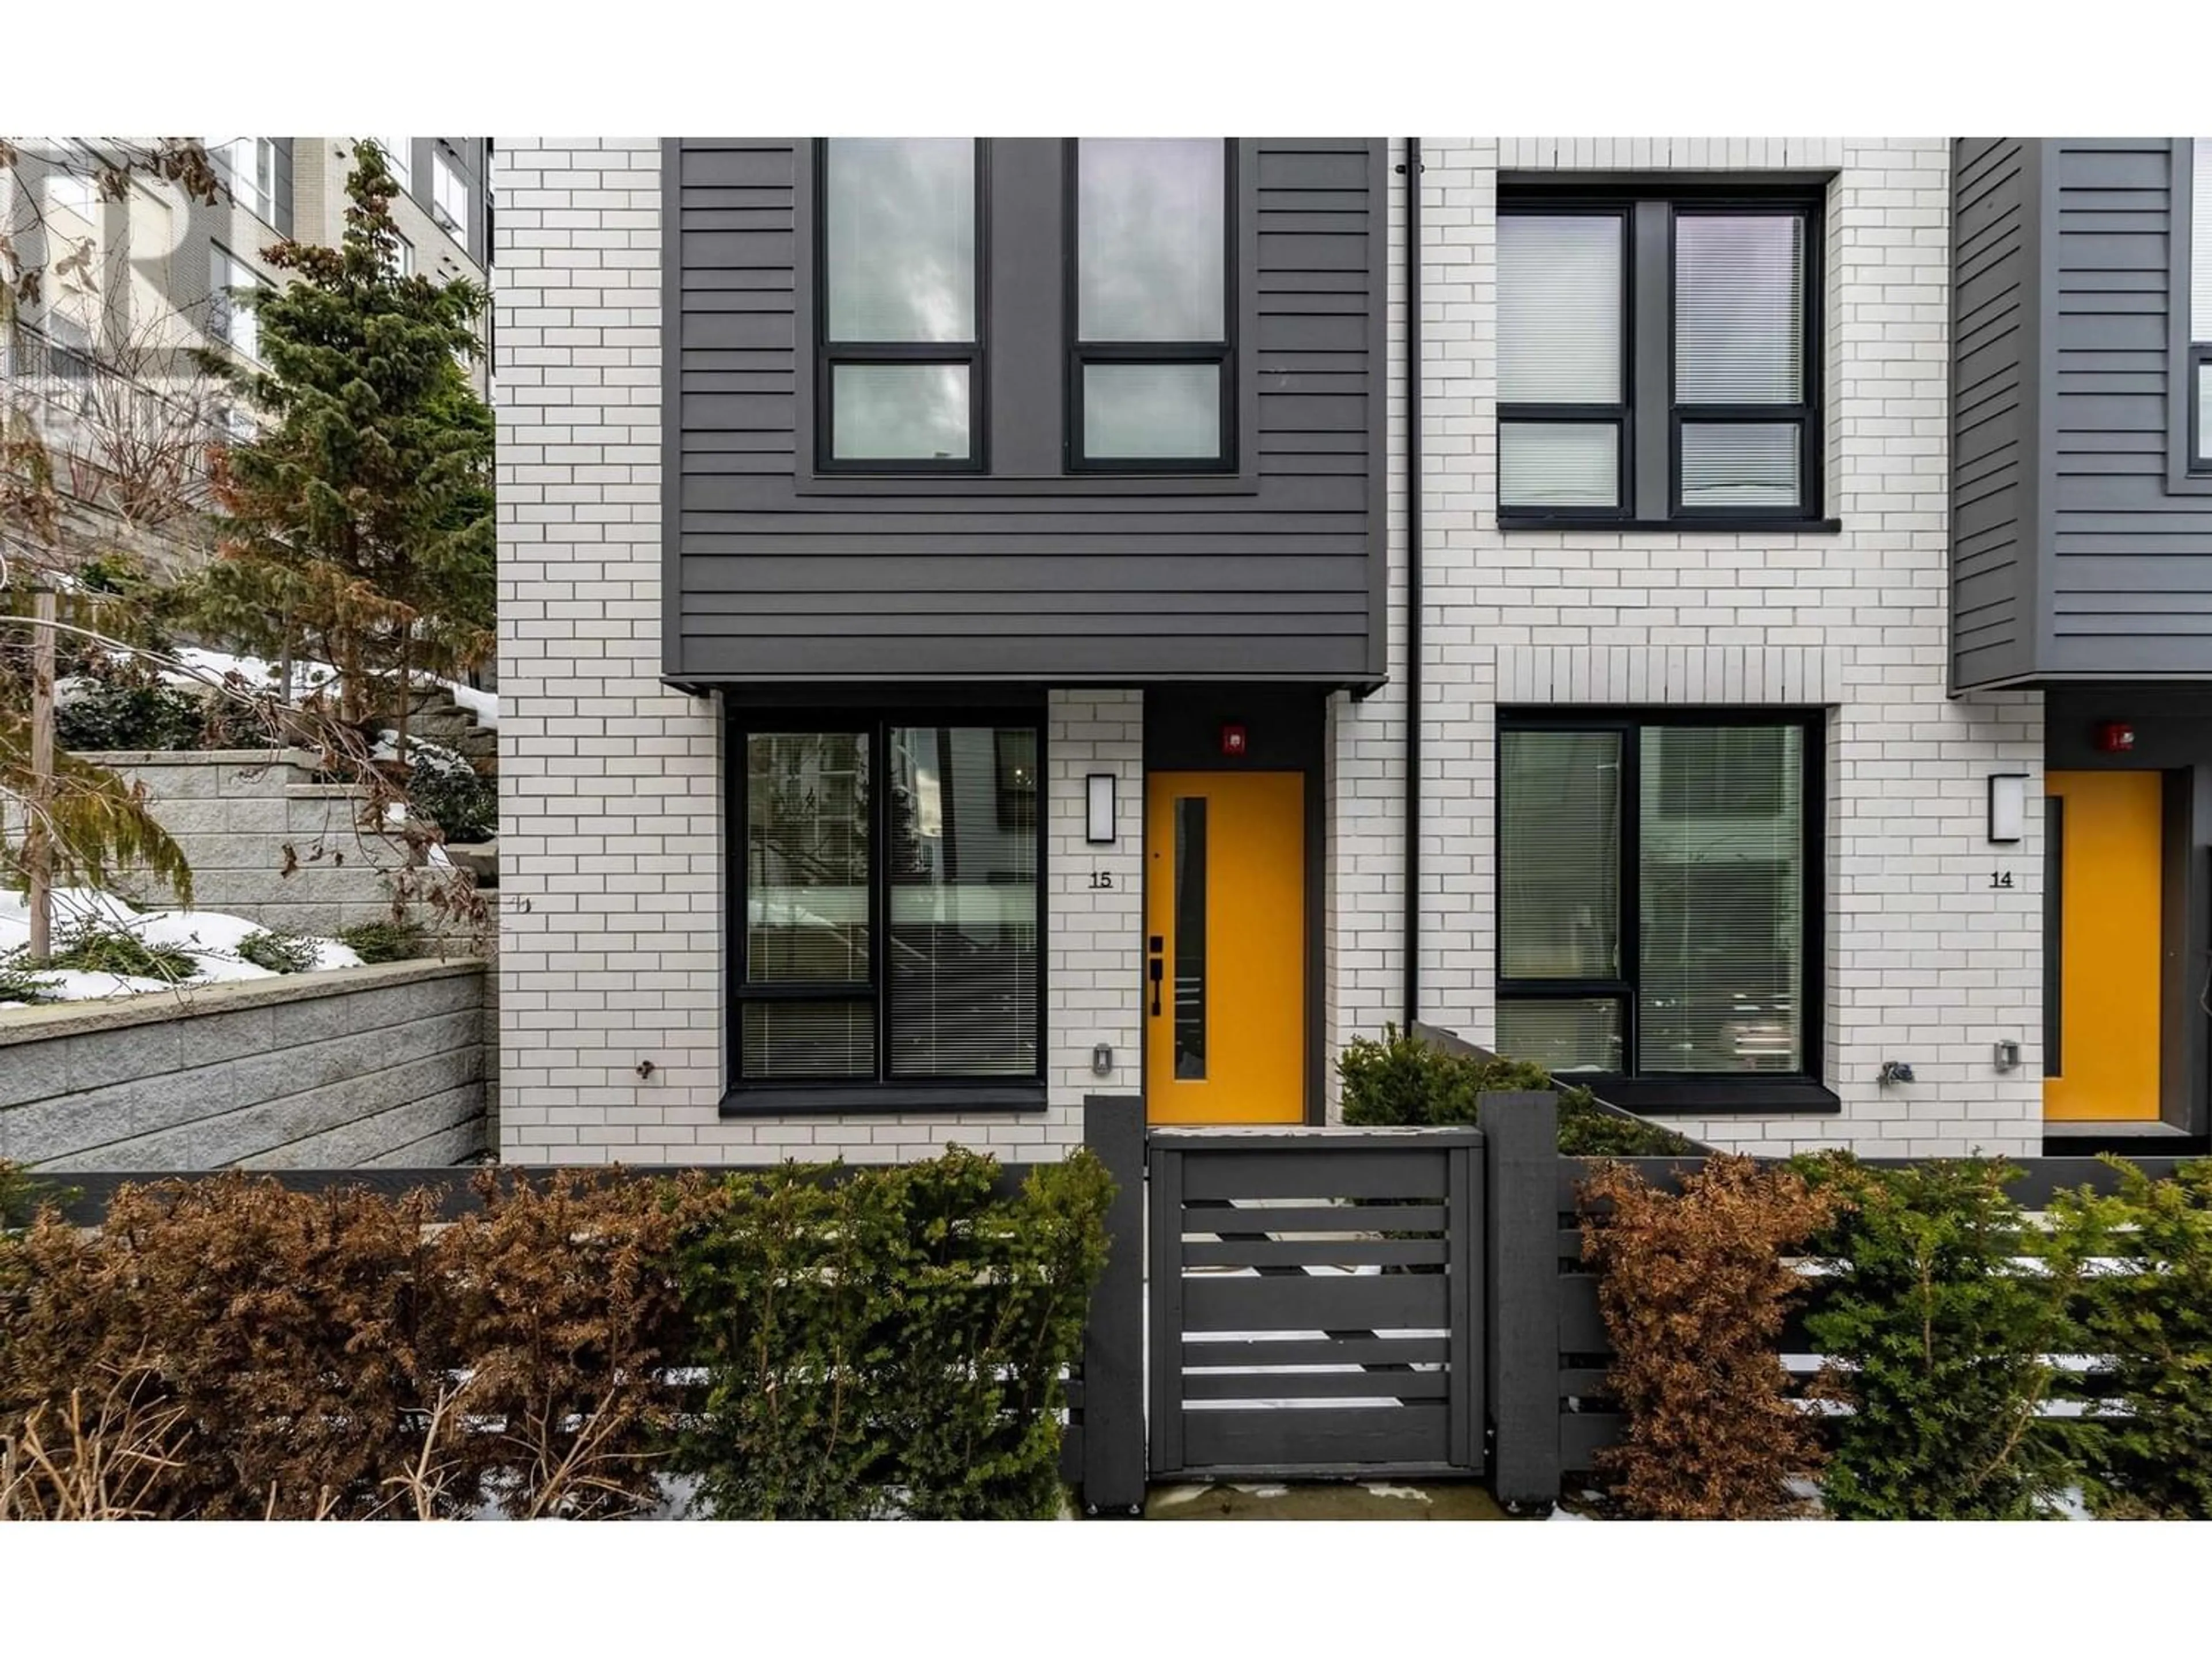 Home with brick exterior material for 15 9278 SLOPES MEWS, Burnaby British Columbia V5A0G1